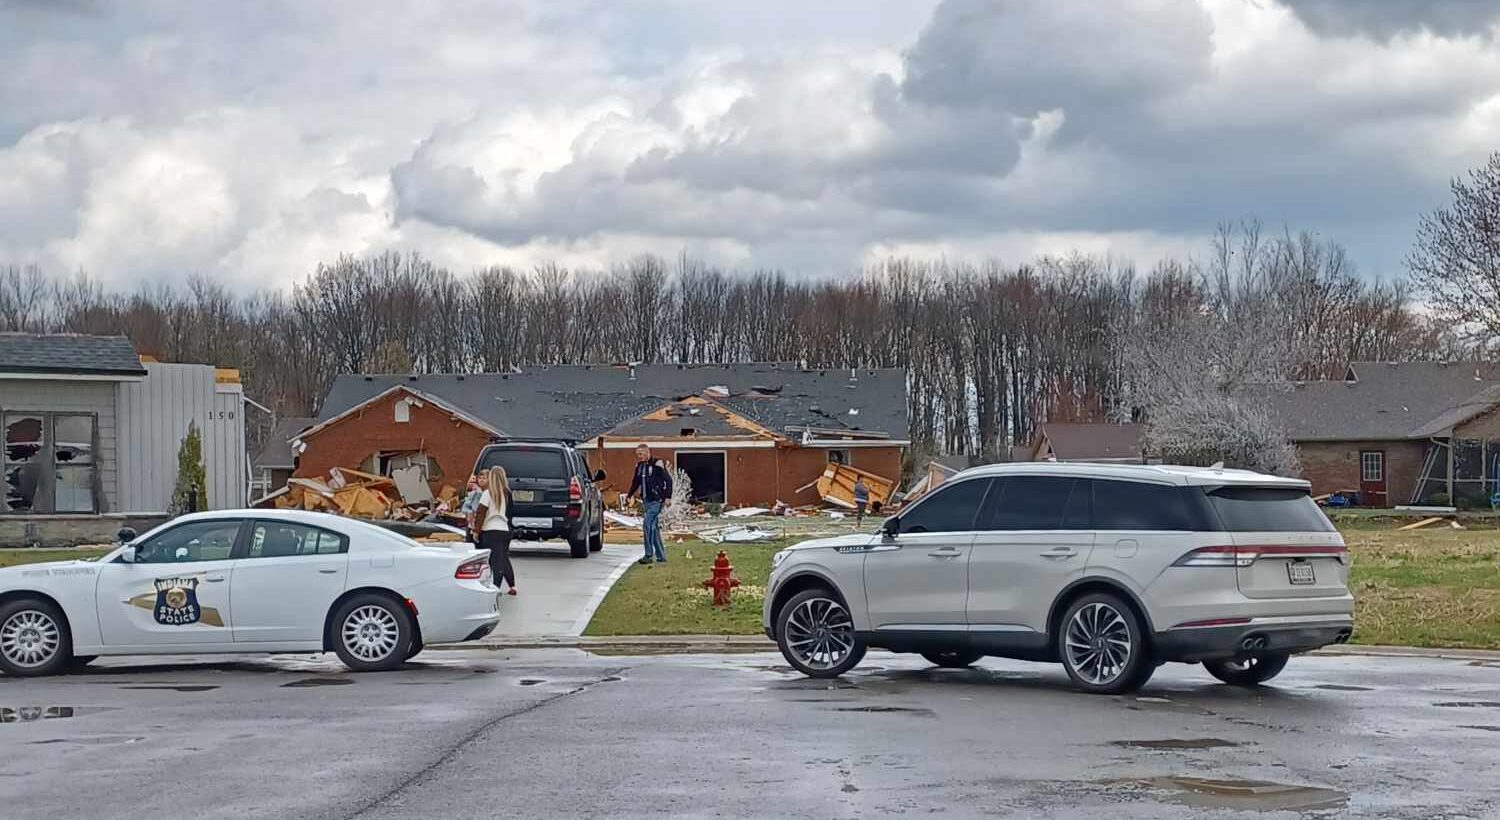 Tornados left a trail of damage in the Jefferson Manor subdivision near Hanover, Indiana on March 14. (Provied Photo/Larry Duke)